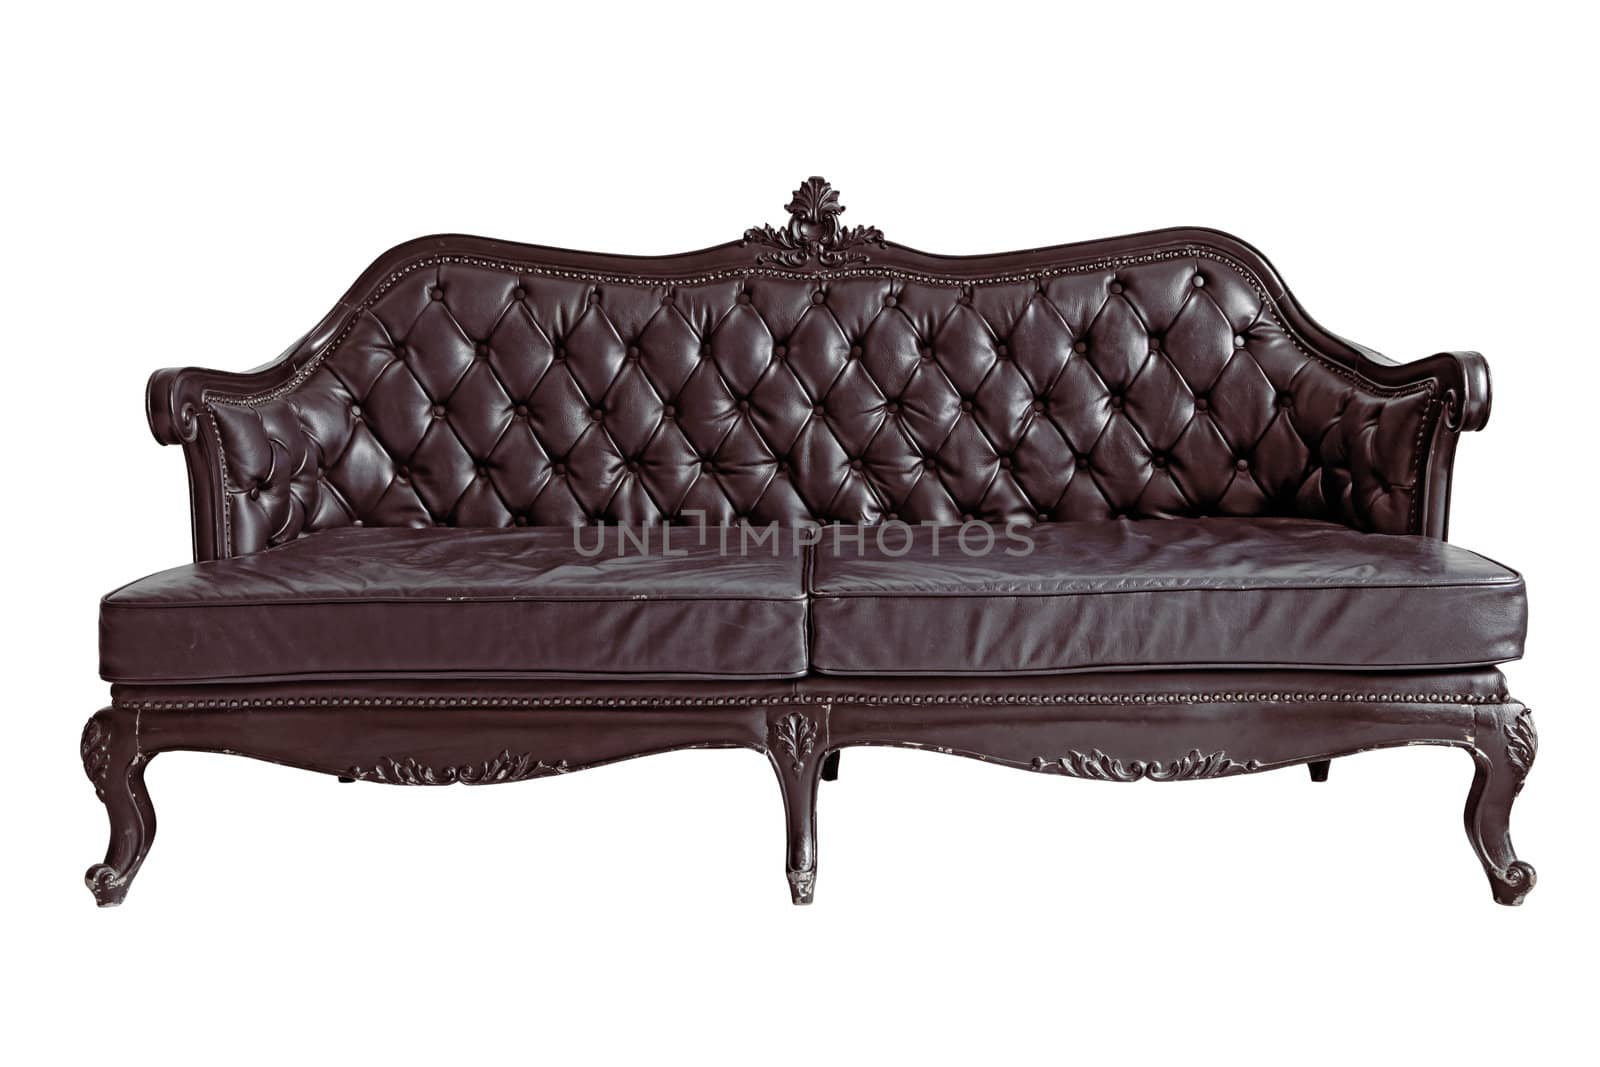 Brown leather sofa by vichie81